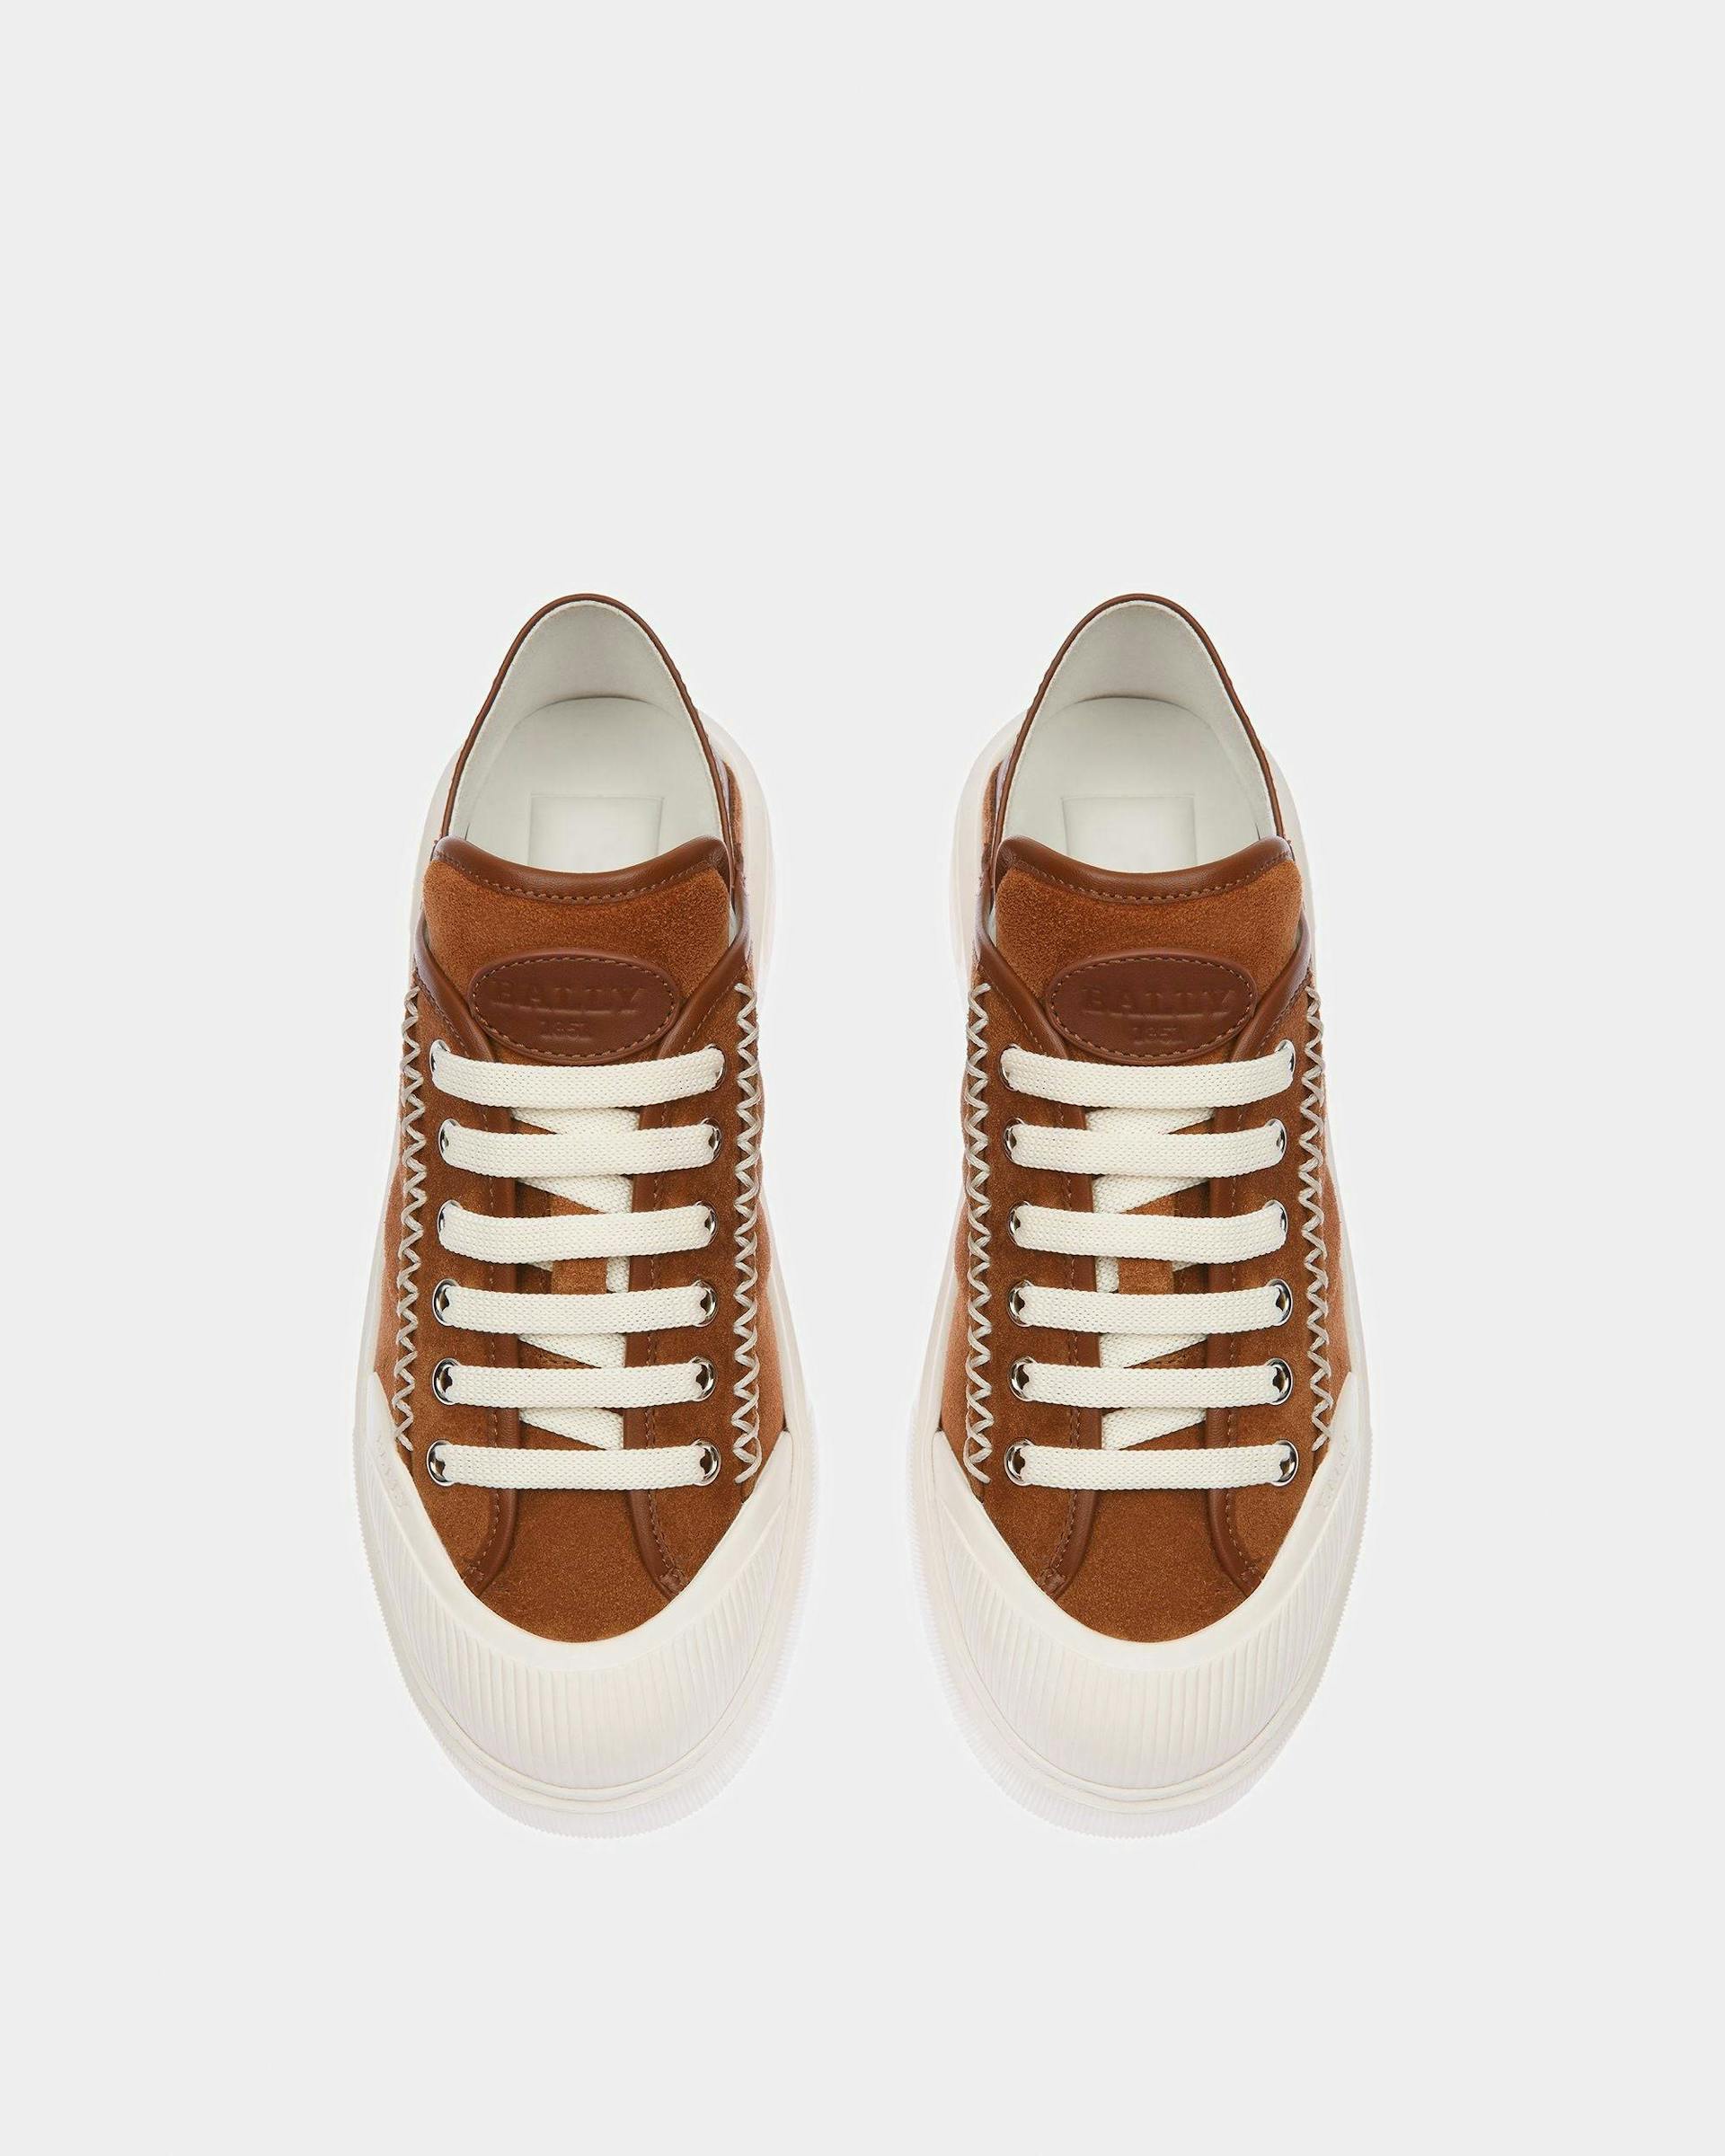 Marily Suede Sneakers In Brown - Women's - Bally - 02